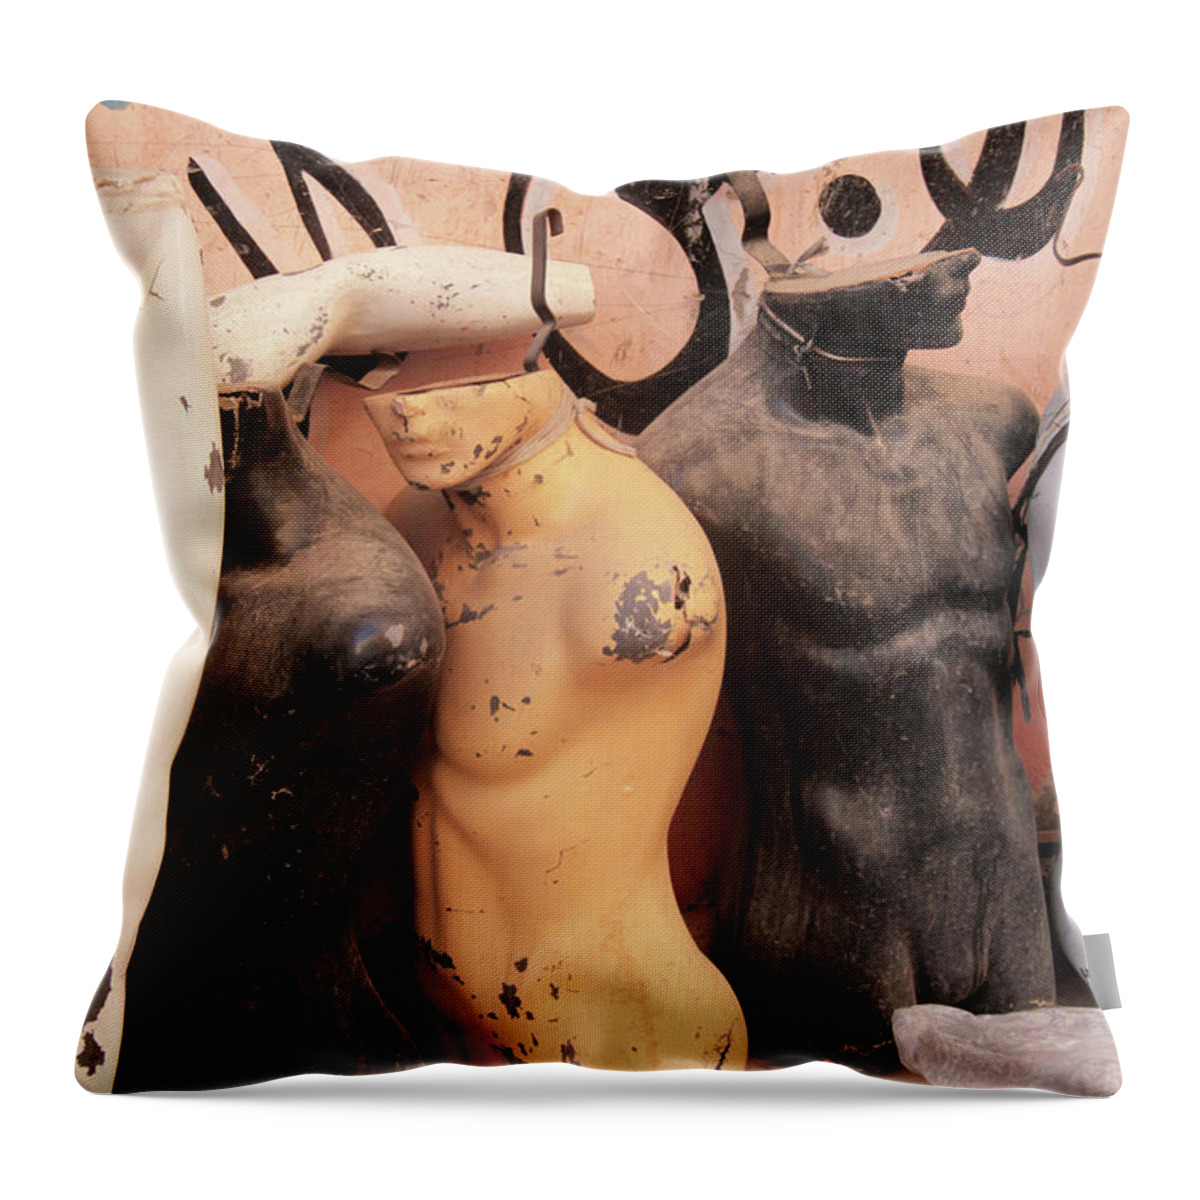 Jezcself Throw Pillow featuring the photograph Manearth by Jez C Self